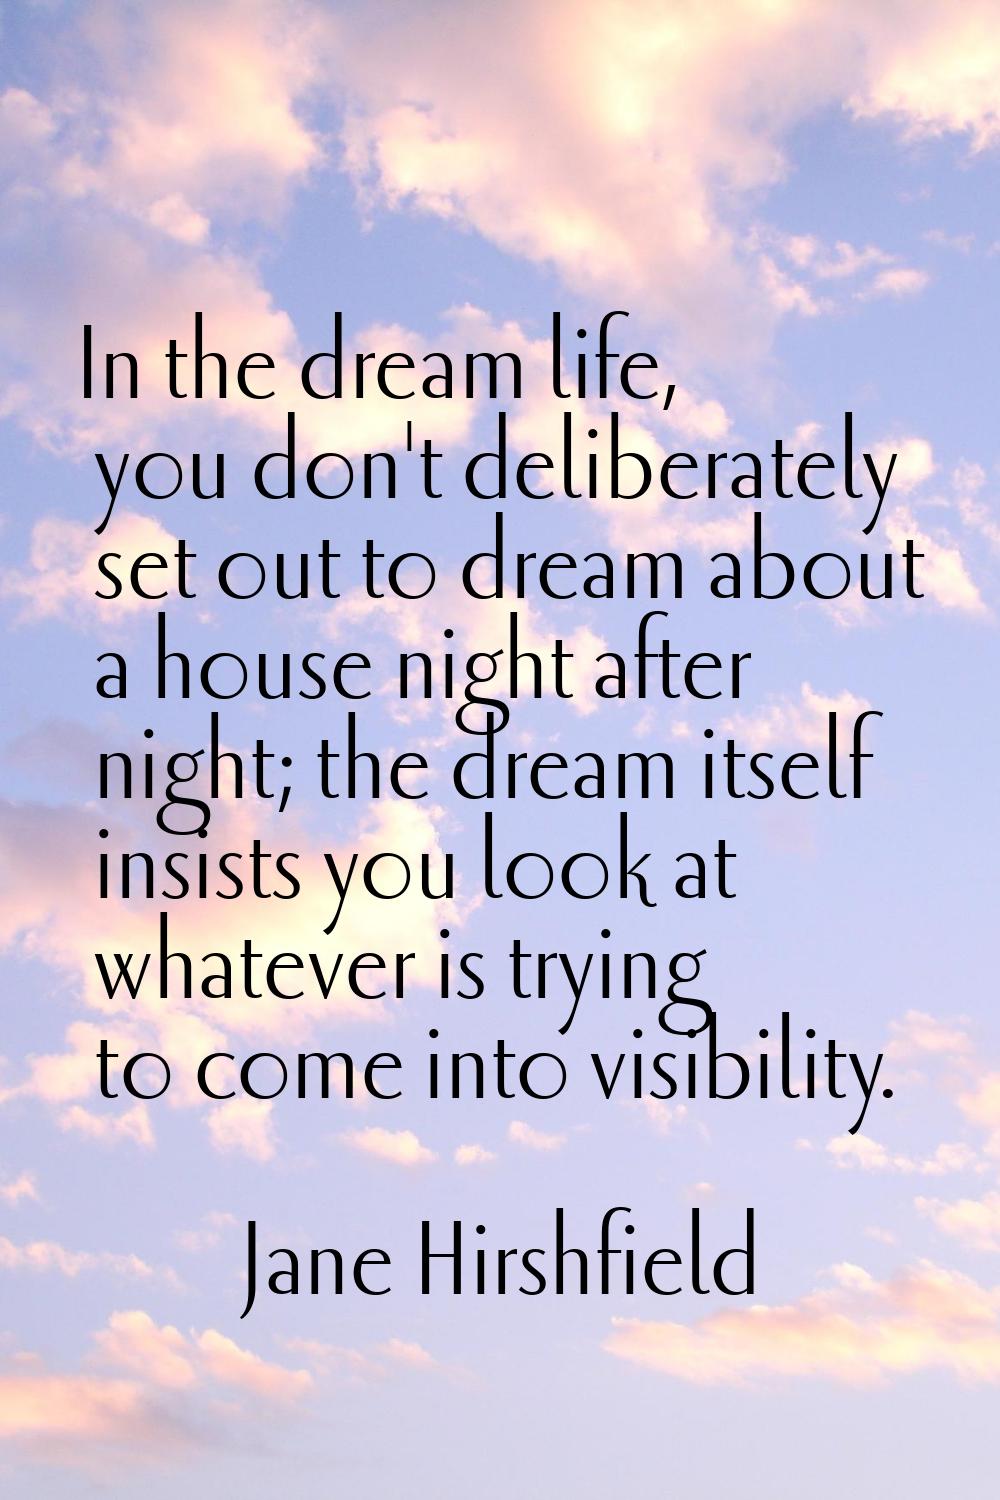 In the dream life, you don't deliberately set out to dream about a house night after night; the dre